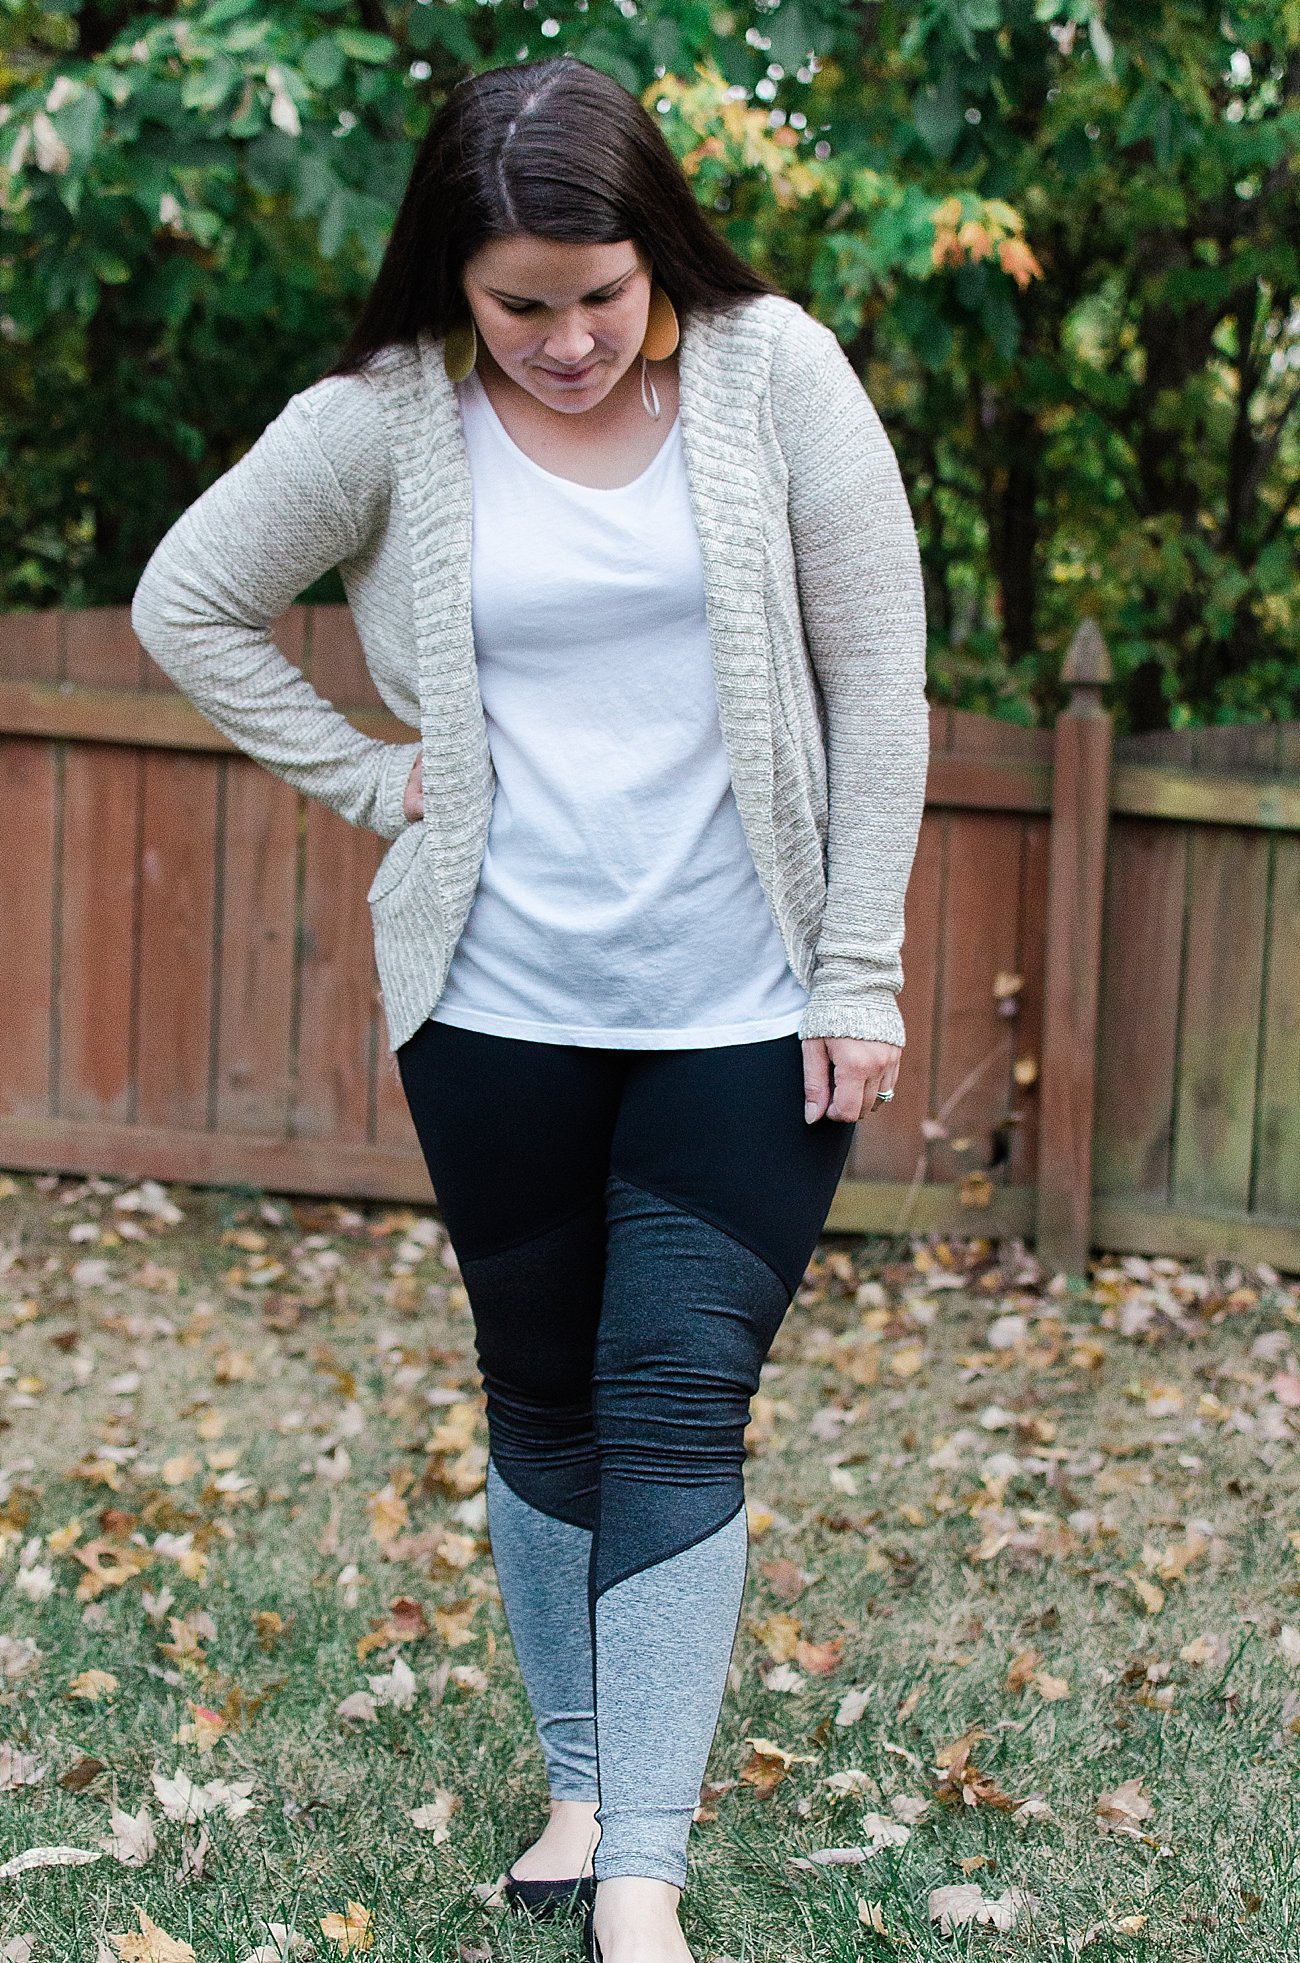 Stitch Fix Review - "Absolutely - Arcada Hooded Back Detail Cardigan" - Size L - $54 - Made in the USA and "good hYOUman Charlie Color Block Leggings" - size XL - $78 (Sustainably and mindfully made in China) - Stitch Fix Review by North Carolina ethical fashion blogger Still Being Molly